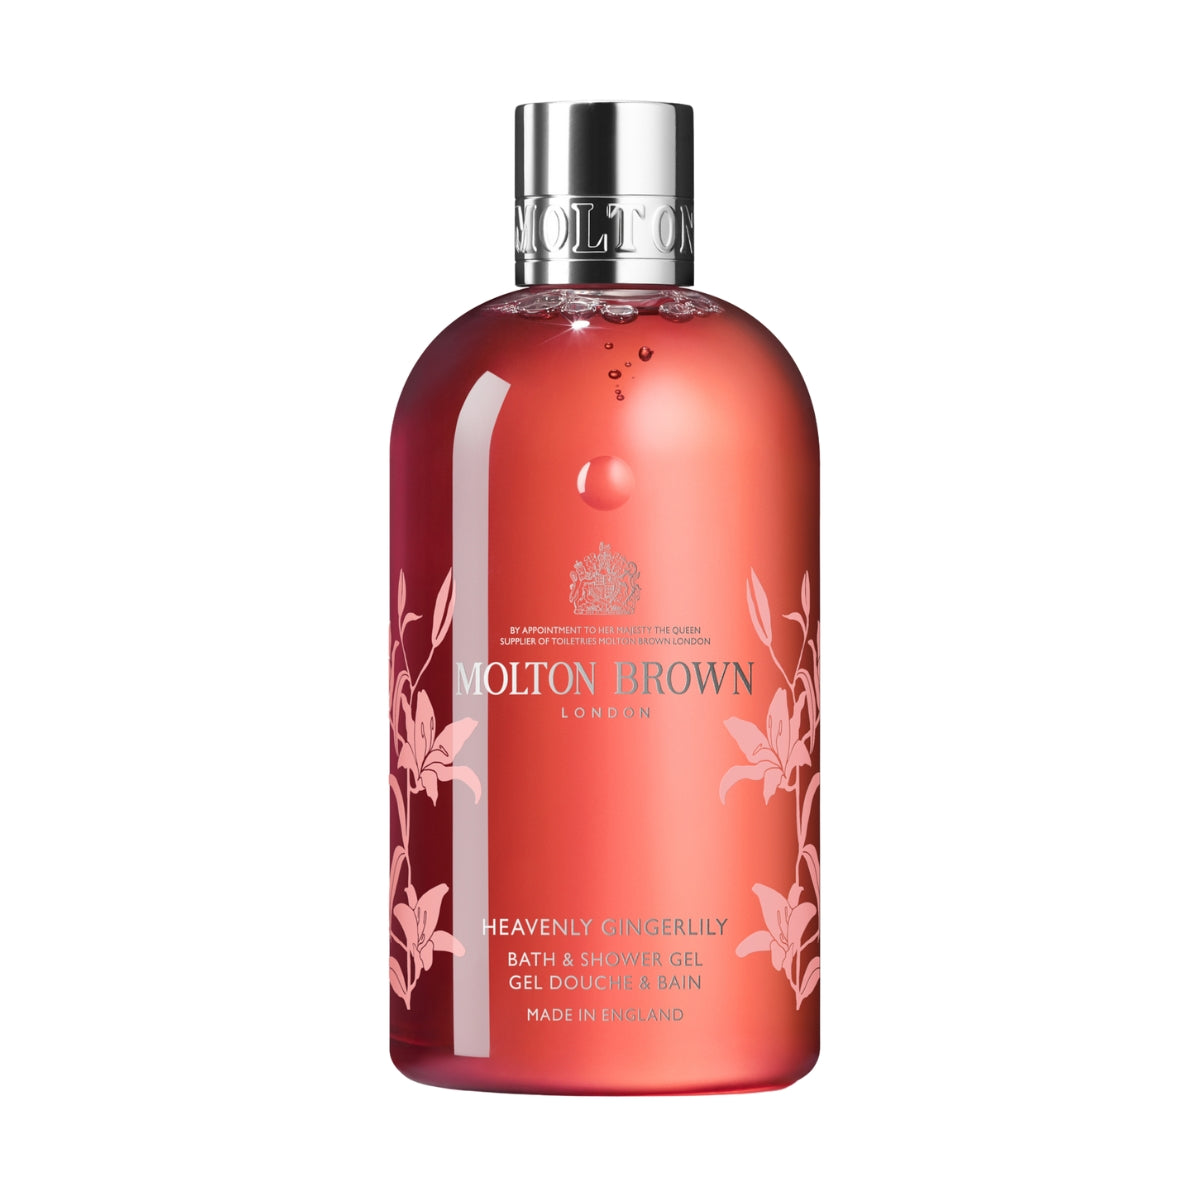 Molton Brown Limited Edition Heavenly Gingerlily Bath & Shower Gel.